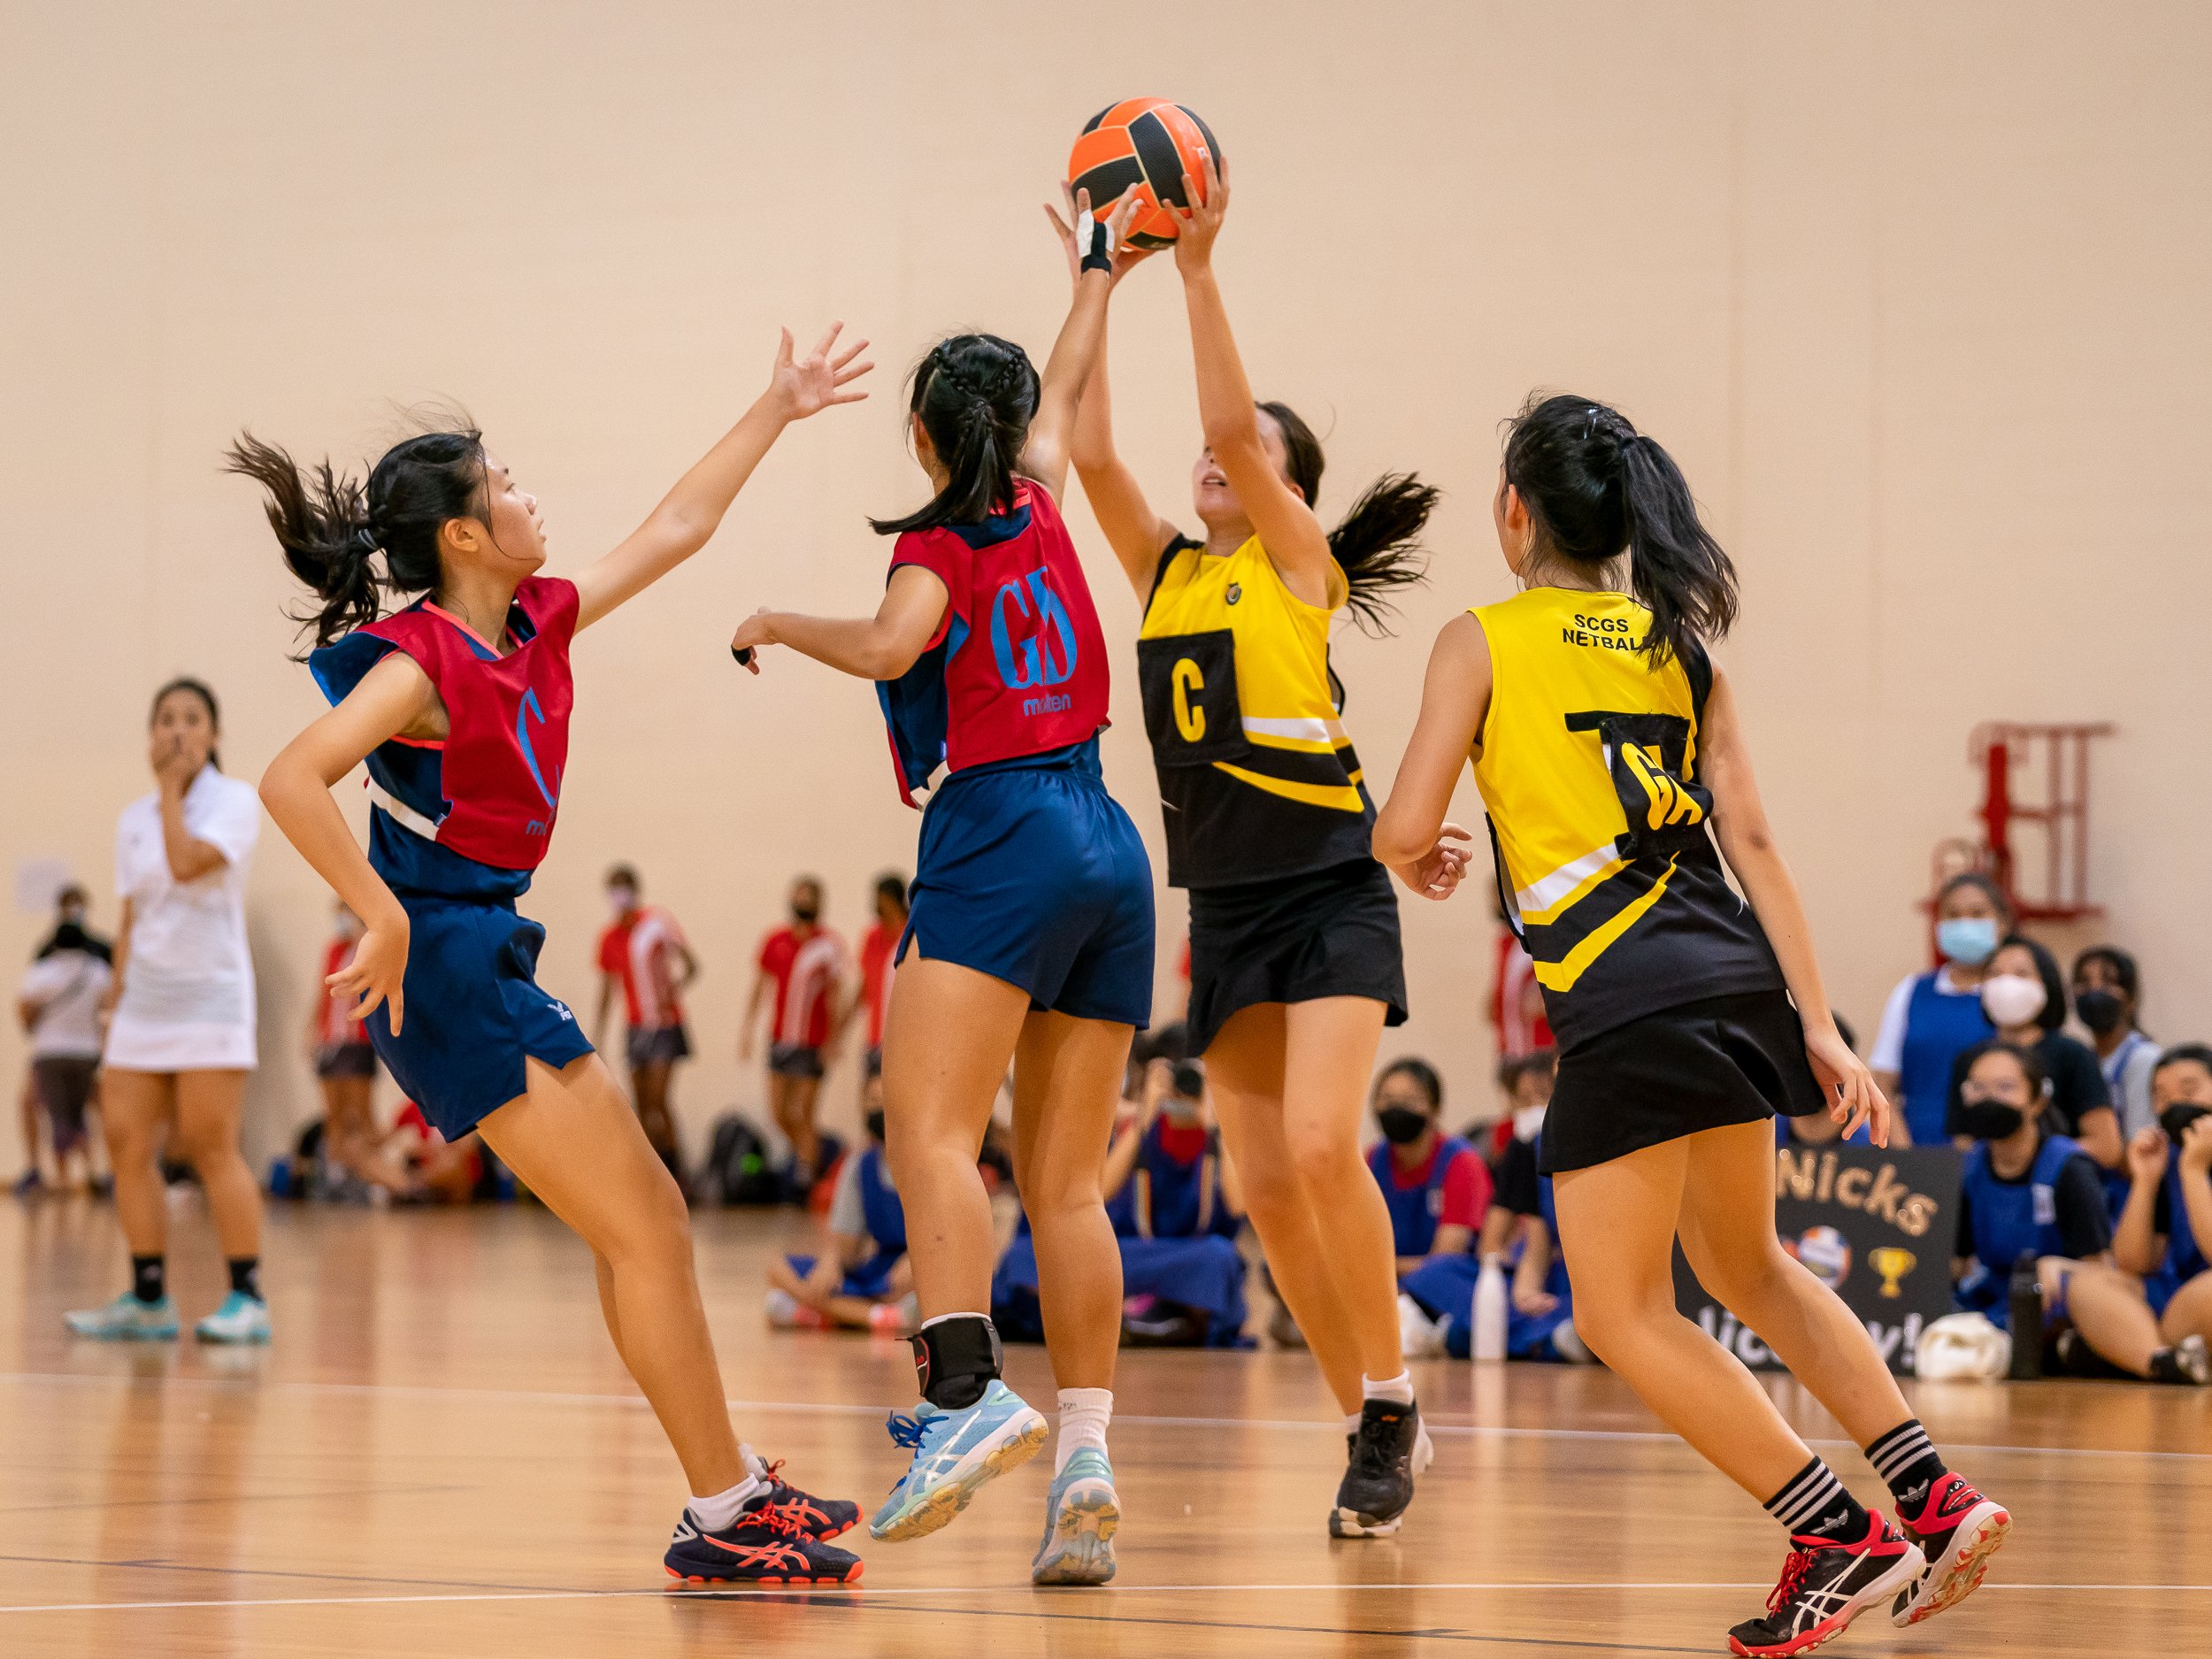 2022-04-29_NSG Netball_Photo By Ron Low_89